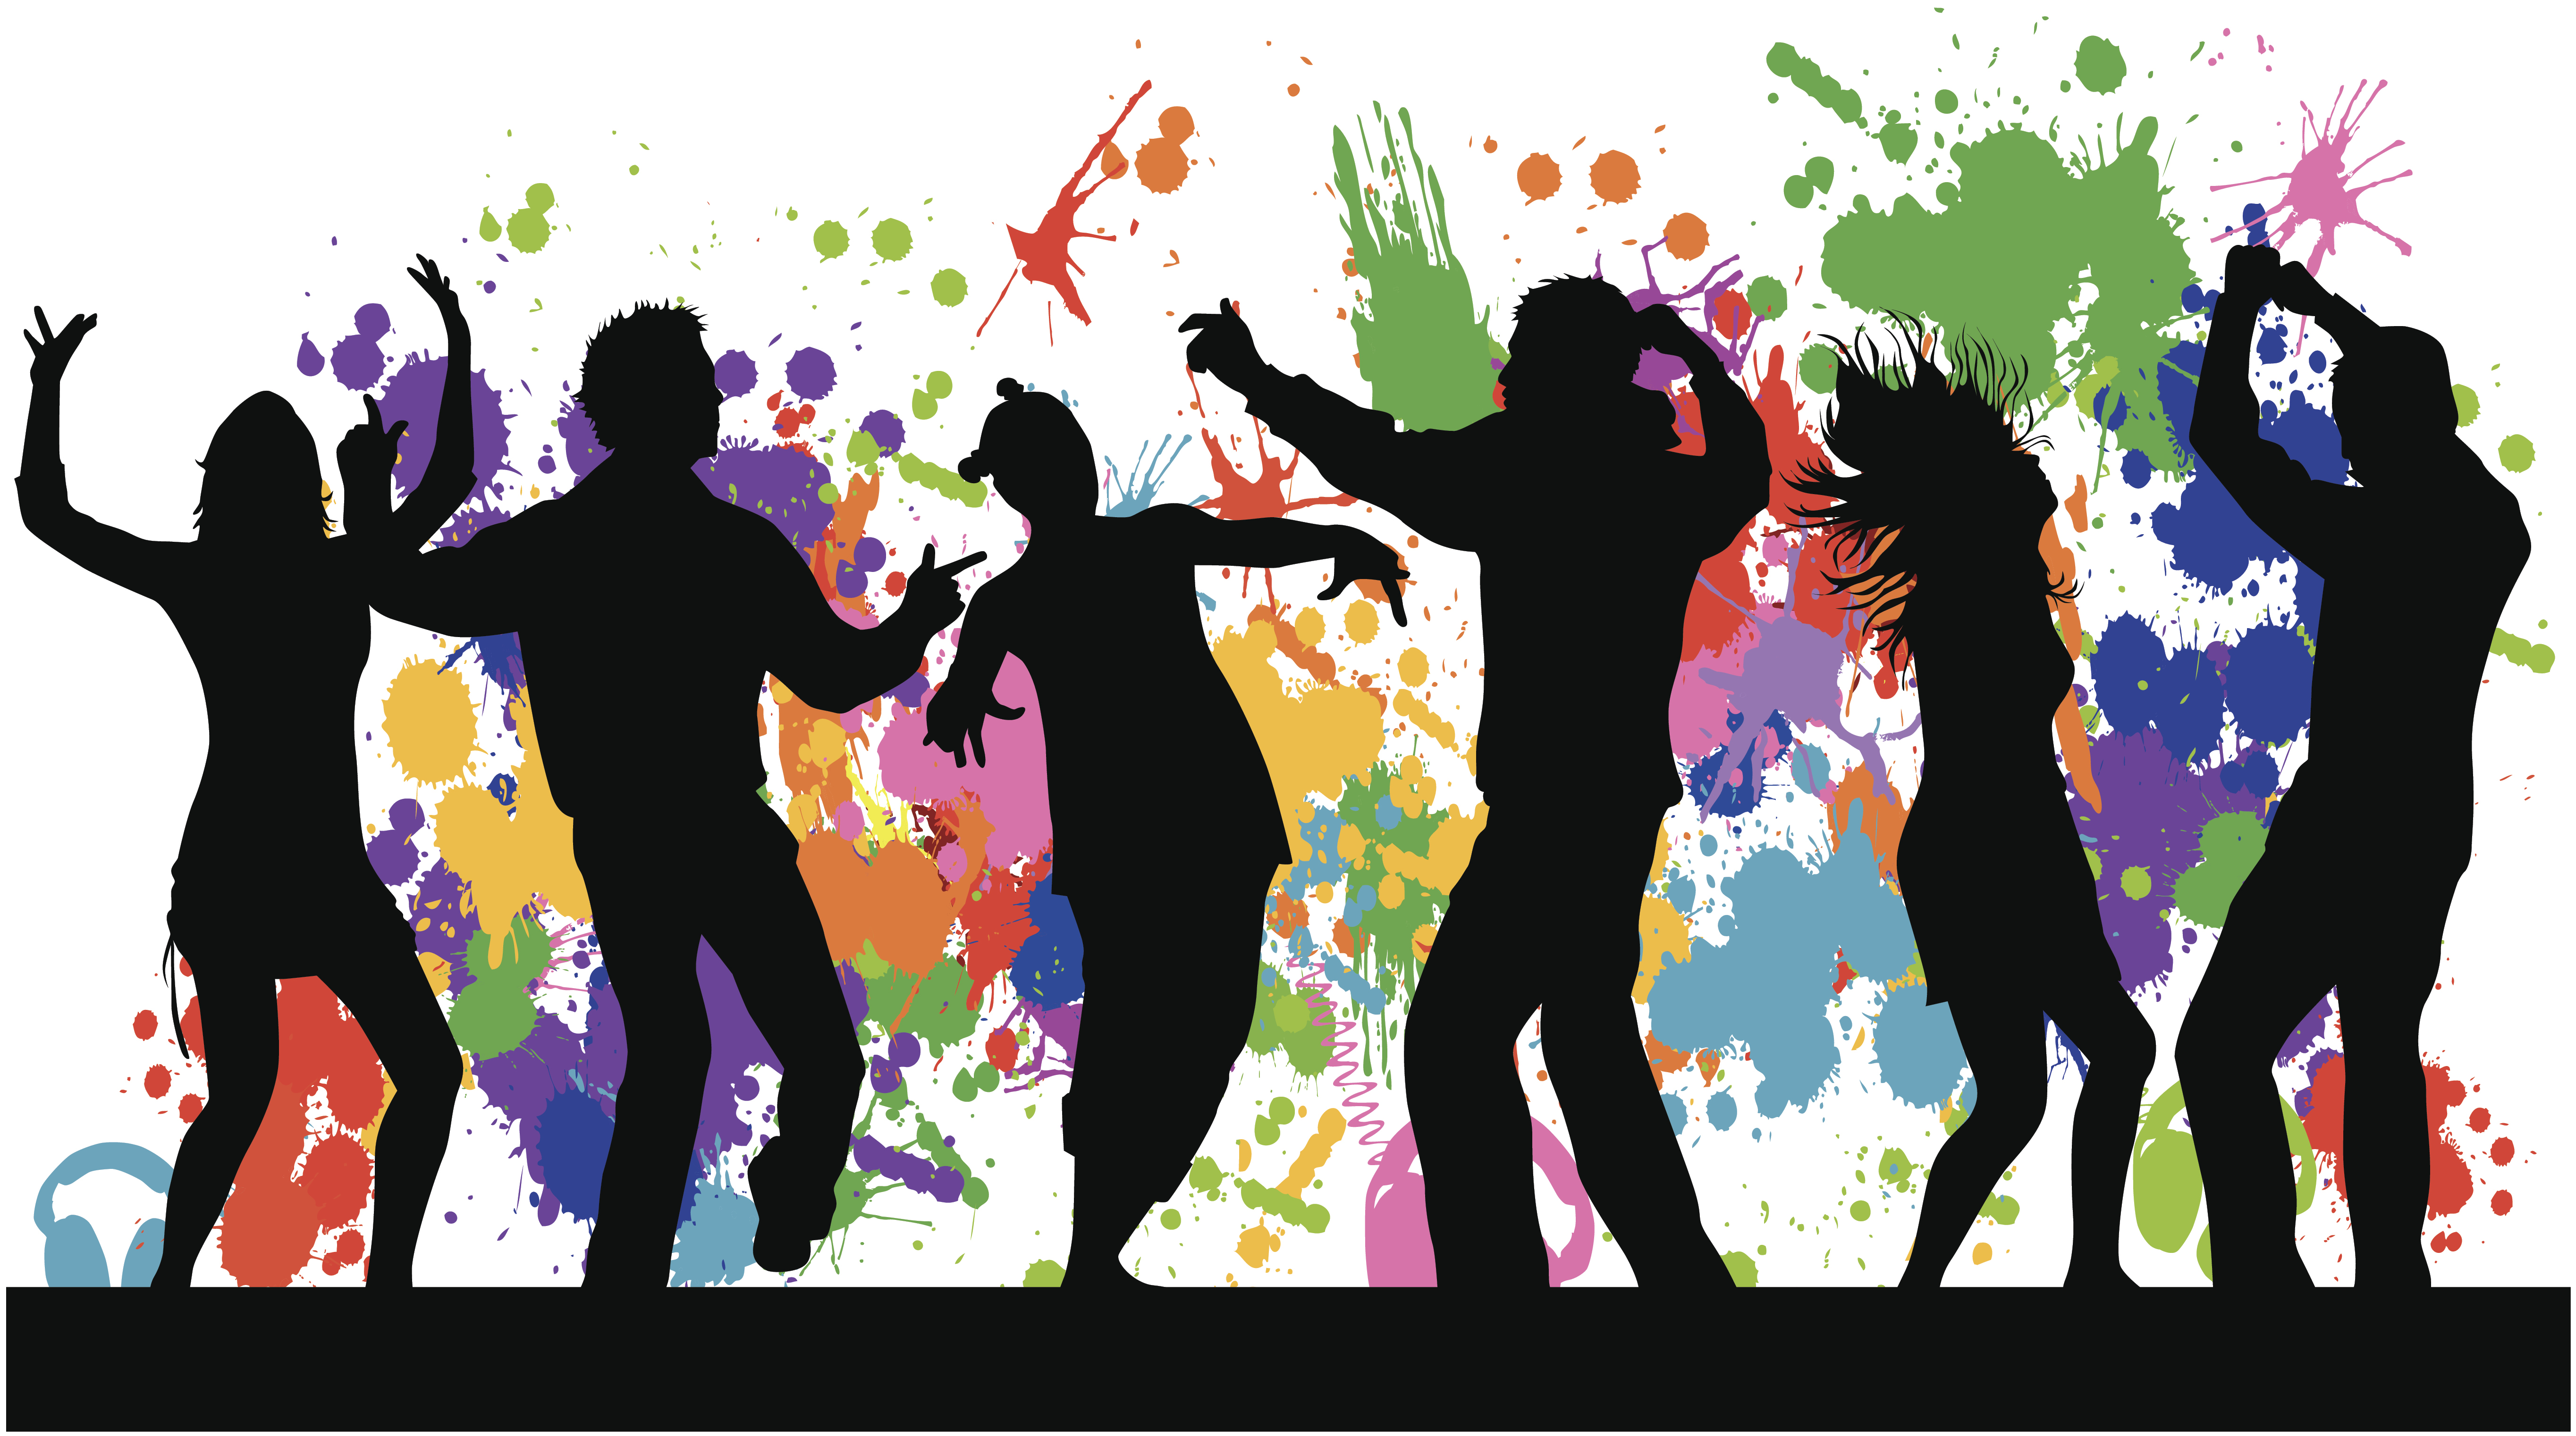 Black silhouettes of people dancing and splash of colors behind them